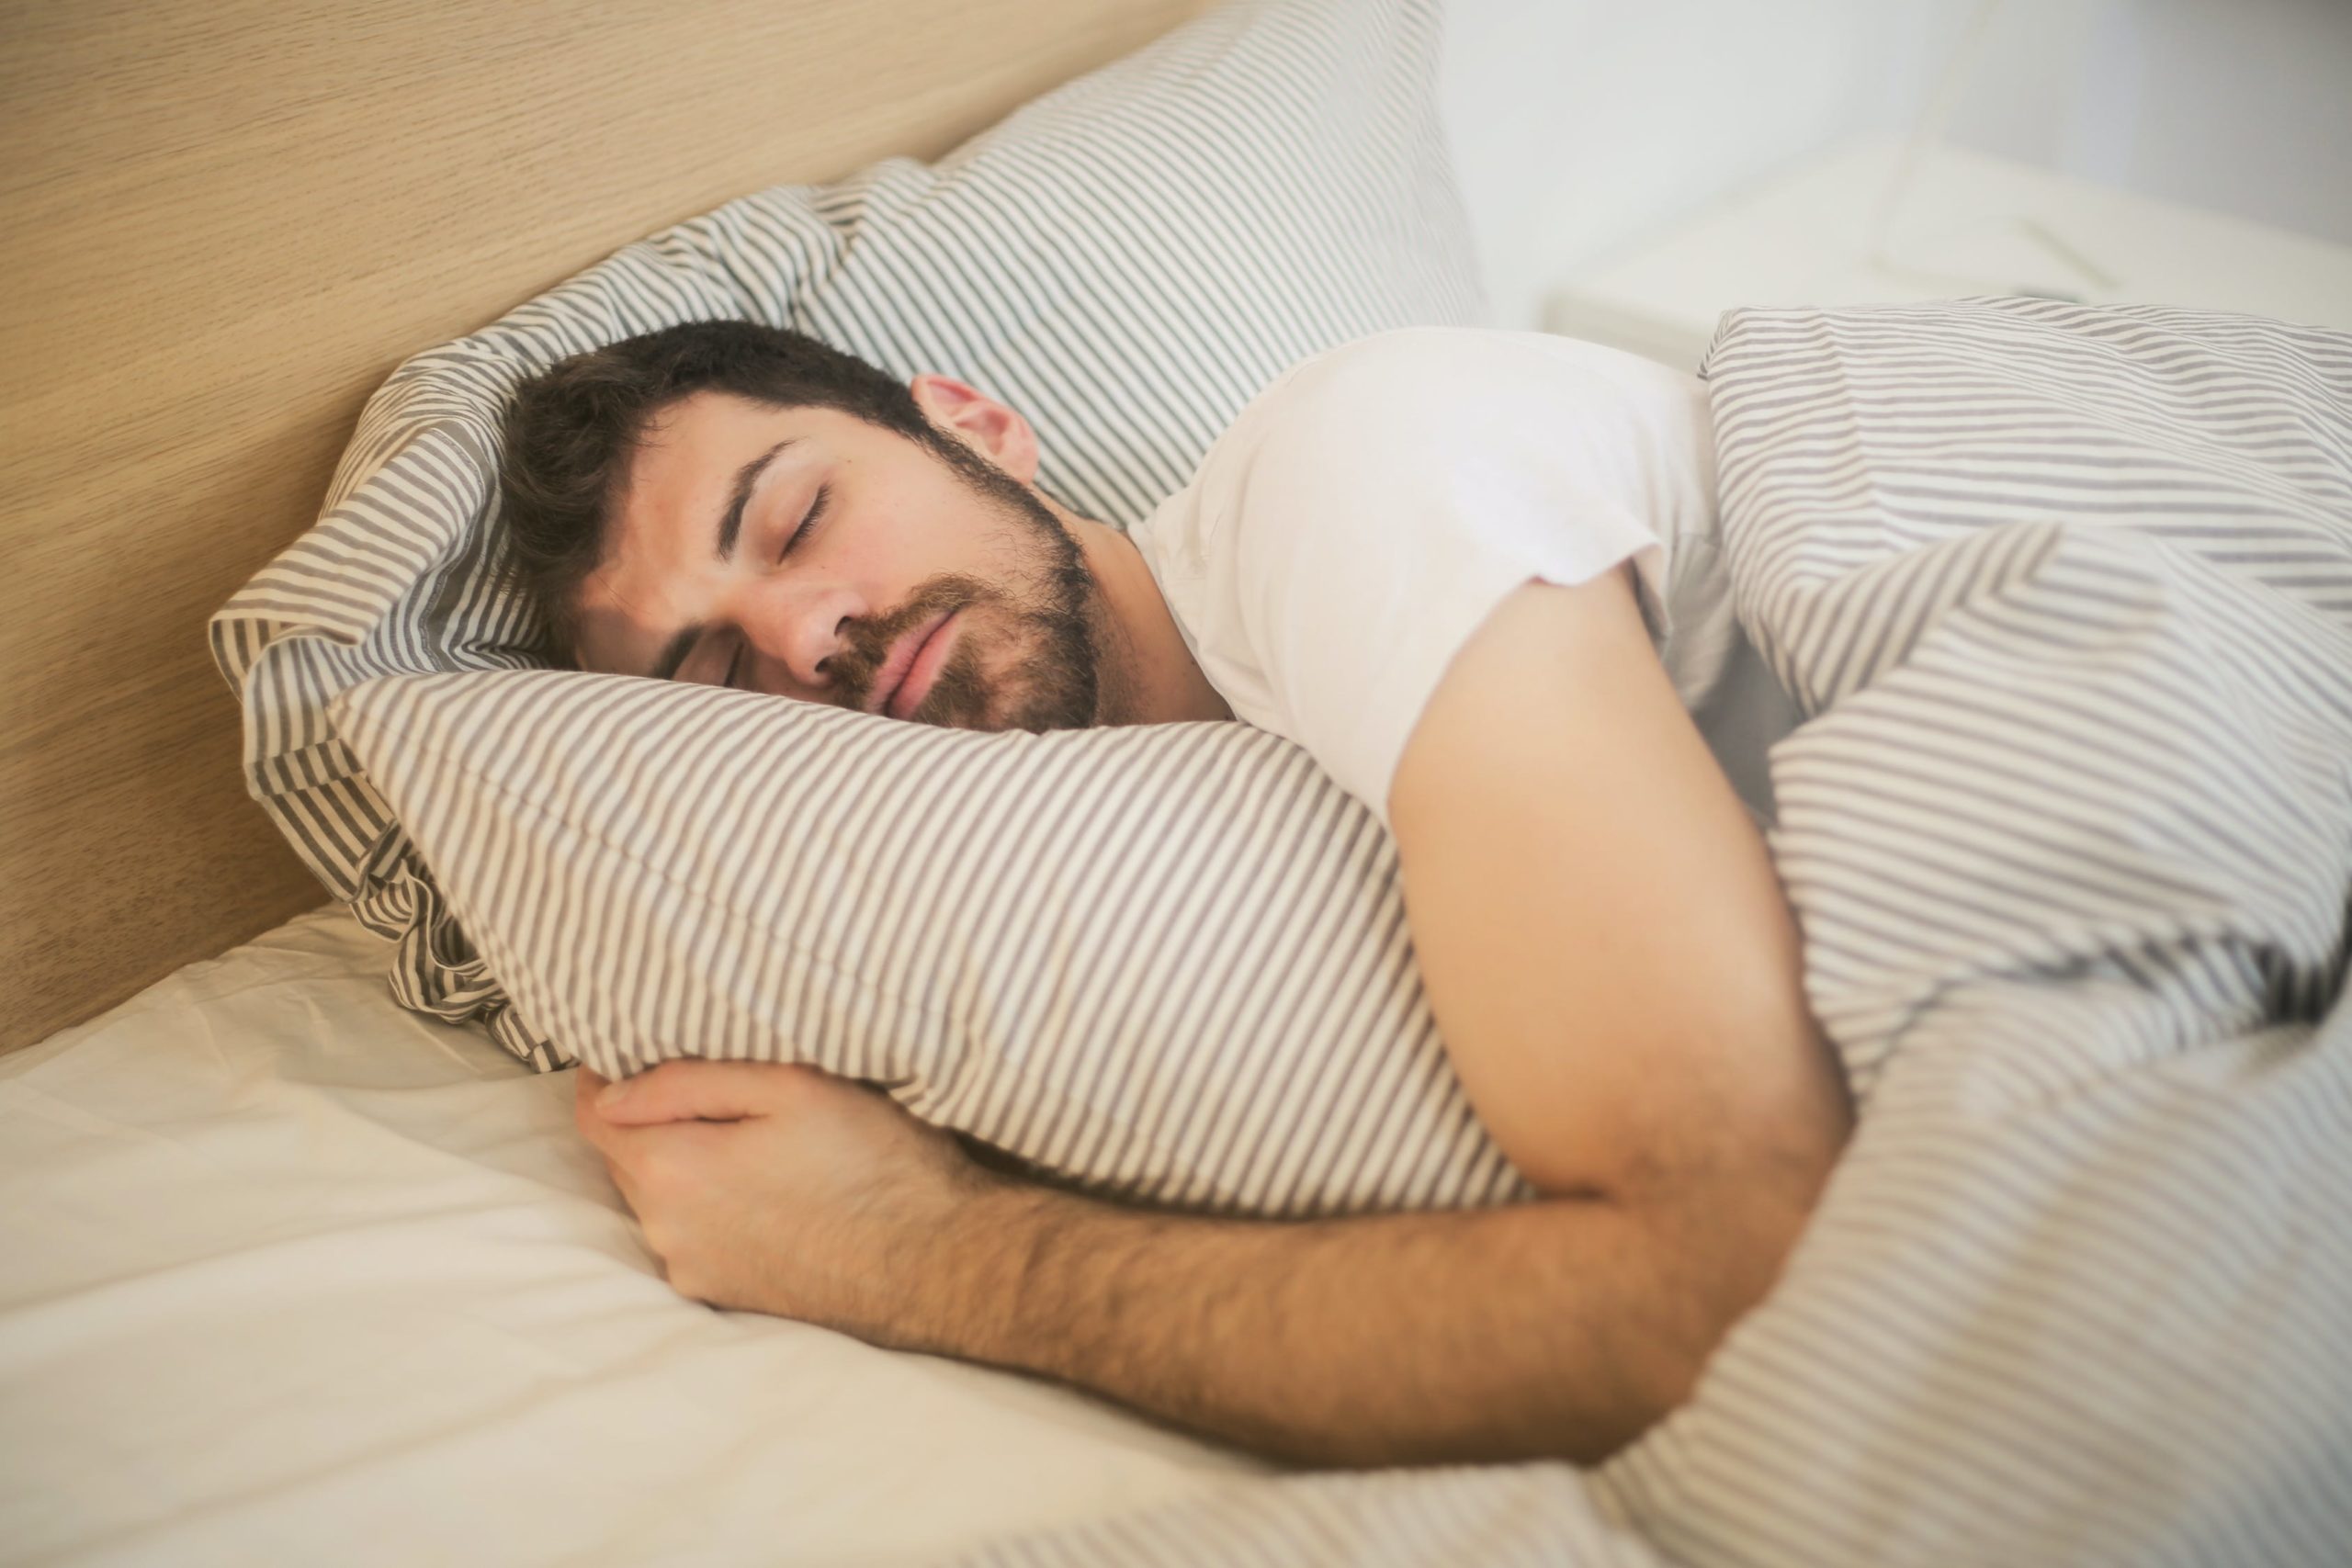 Do You Know How Sleep Apnea Could Affect Your Body? Find Out!